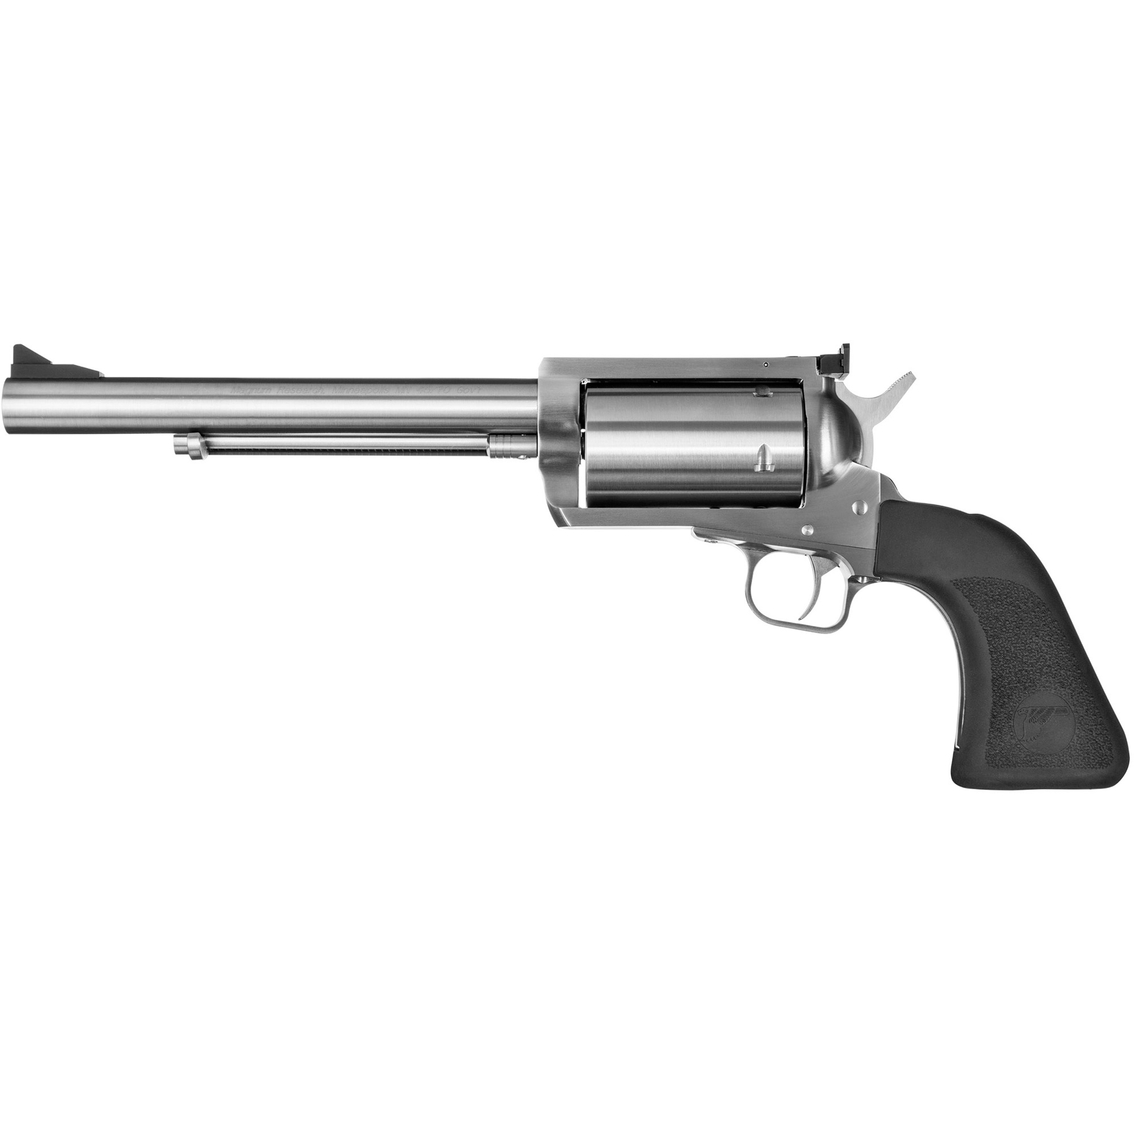 Magnum Research BFR 357 Mag 7.5 in. Barrel 6 Rnd Revolver Stainless - Image 2 of 2